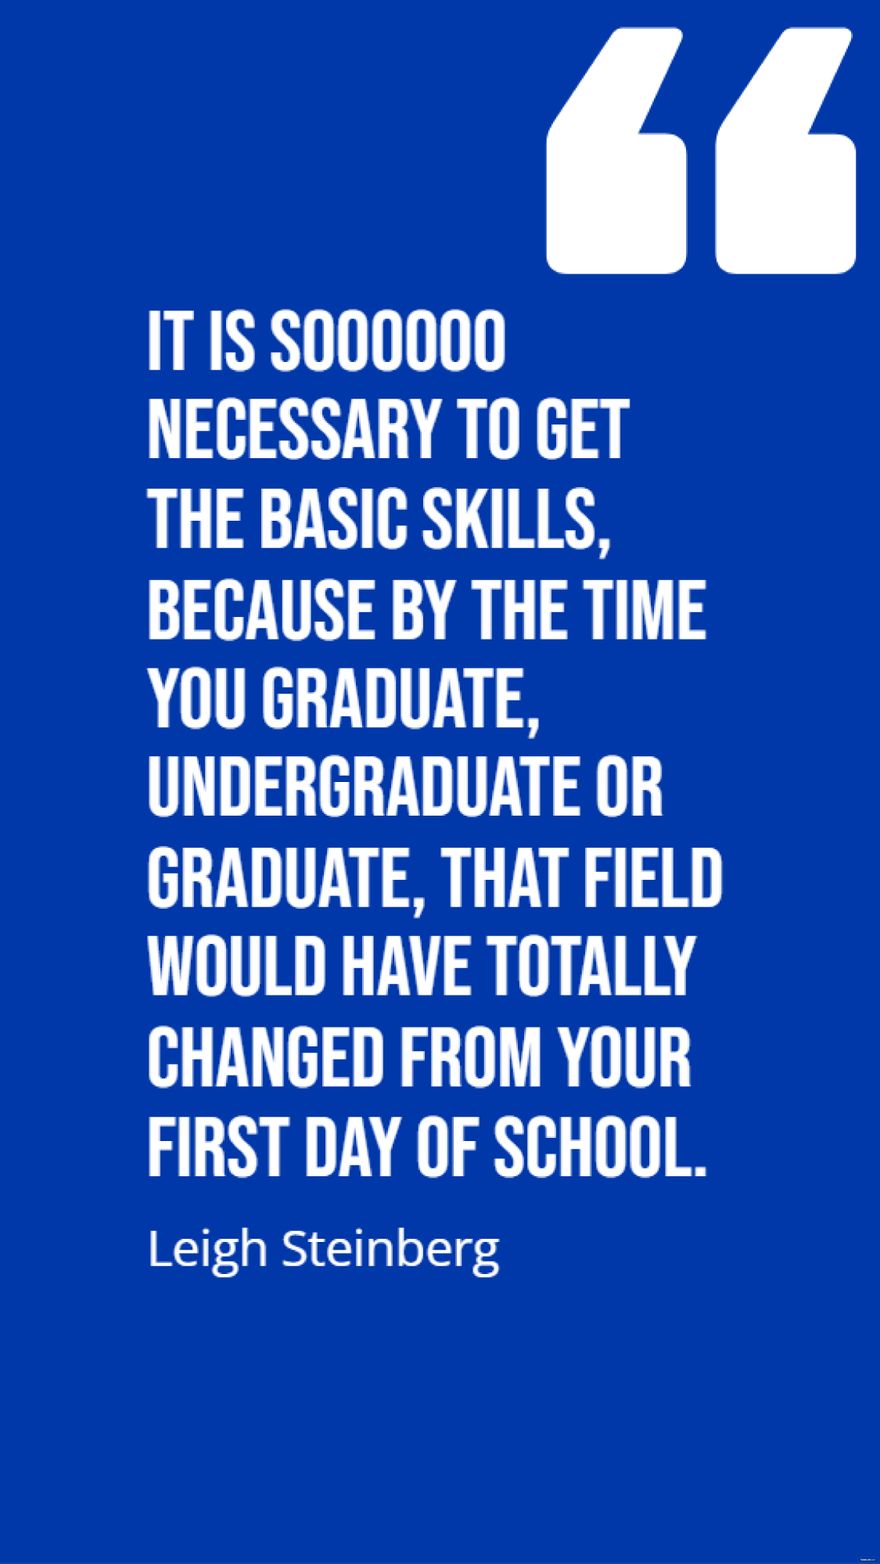 Free Leigh Steinberg - It is soooooo necessary to get the basic skills, because by the time you graduate, undergraduate or graduate, that field would have totally changed from your first day of school. Tem